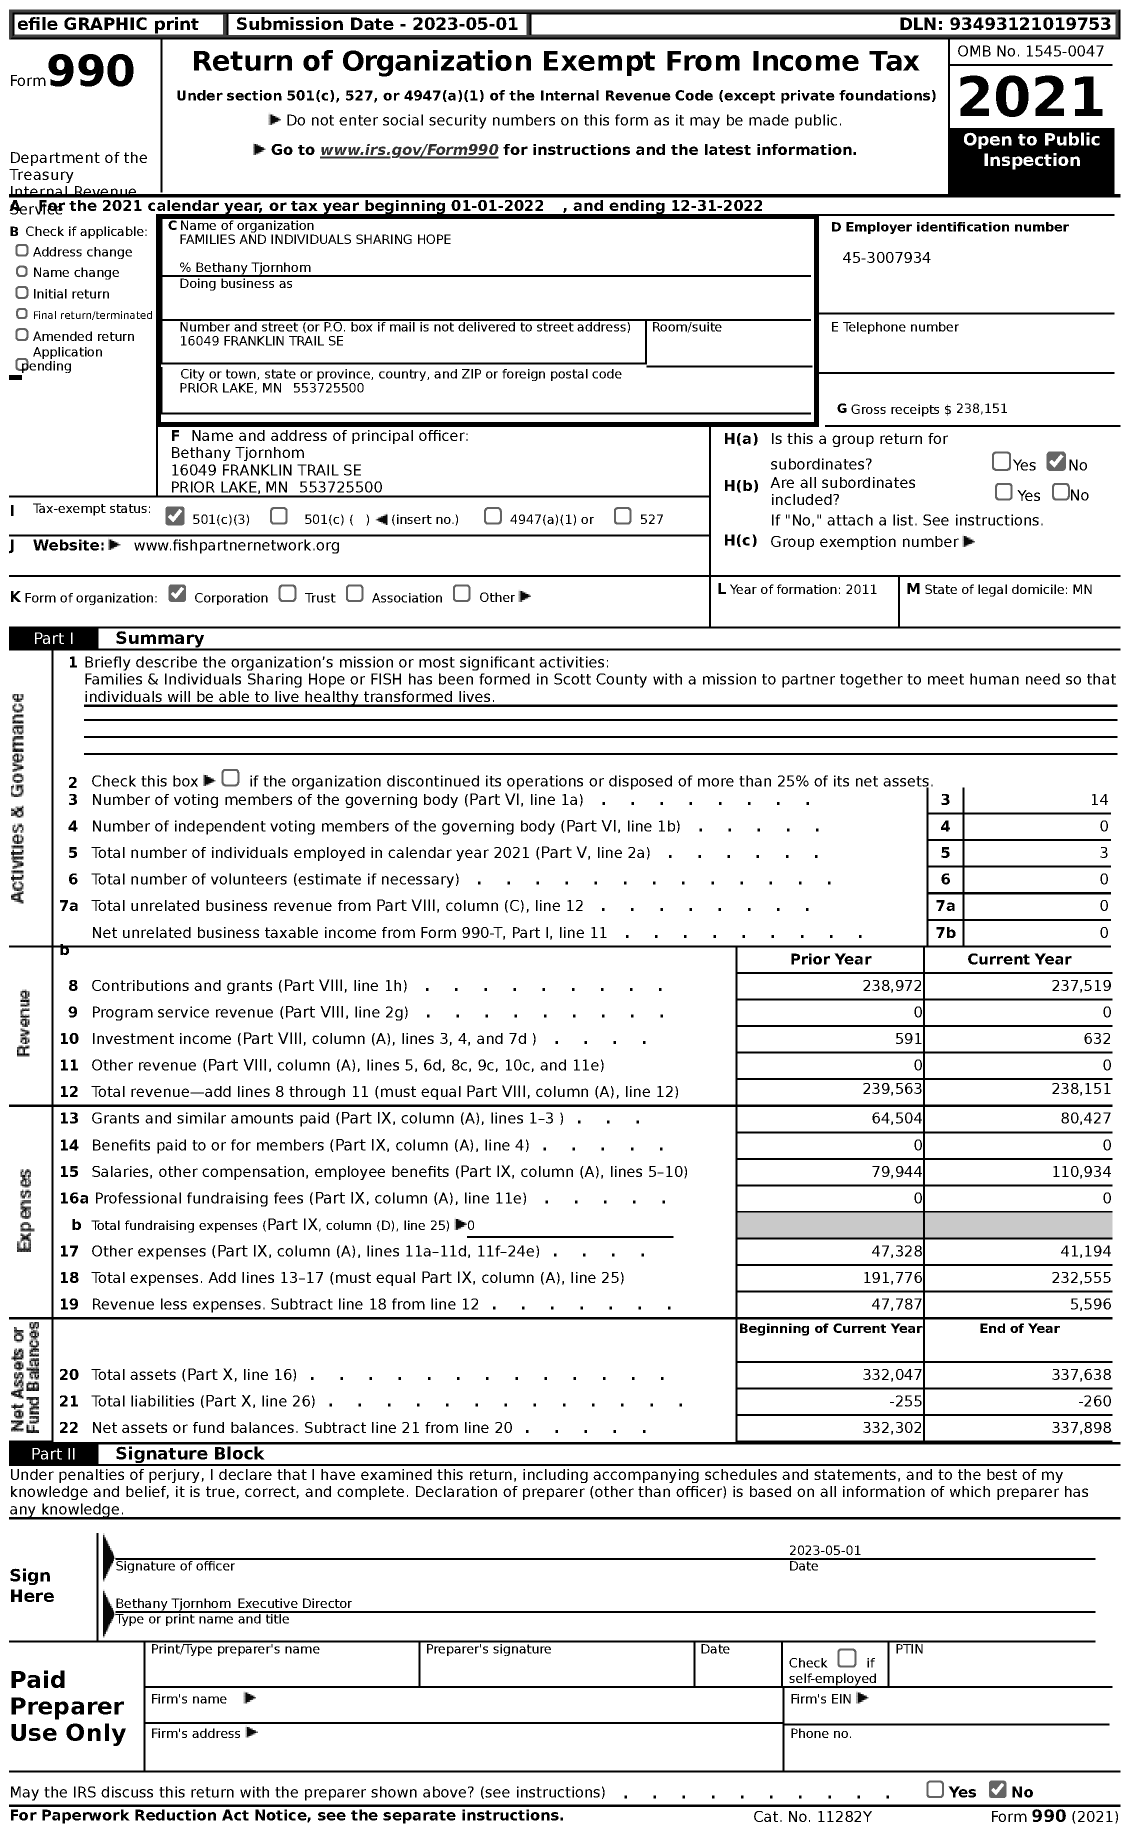 Image of first page of 2022 Form 990 for Families and Individuals Sharing Hope